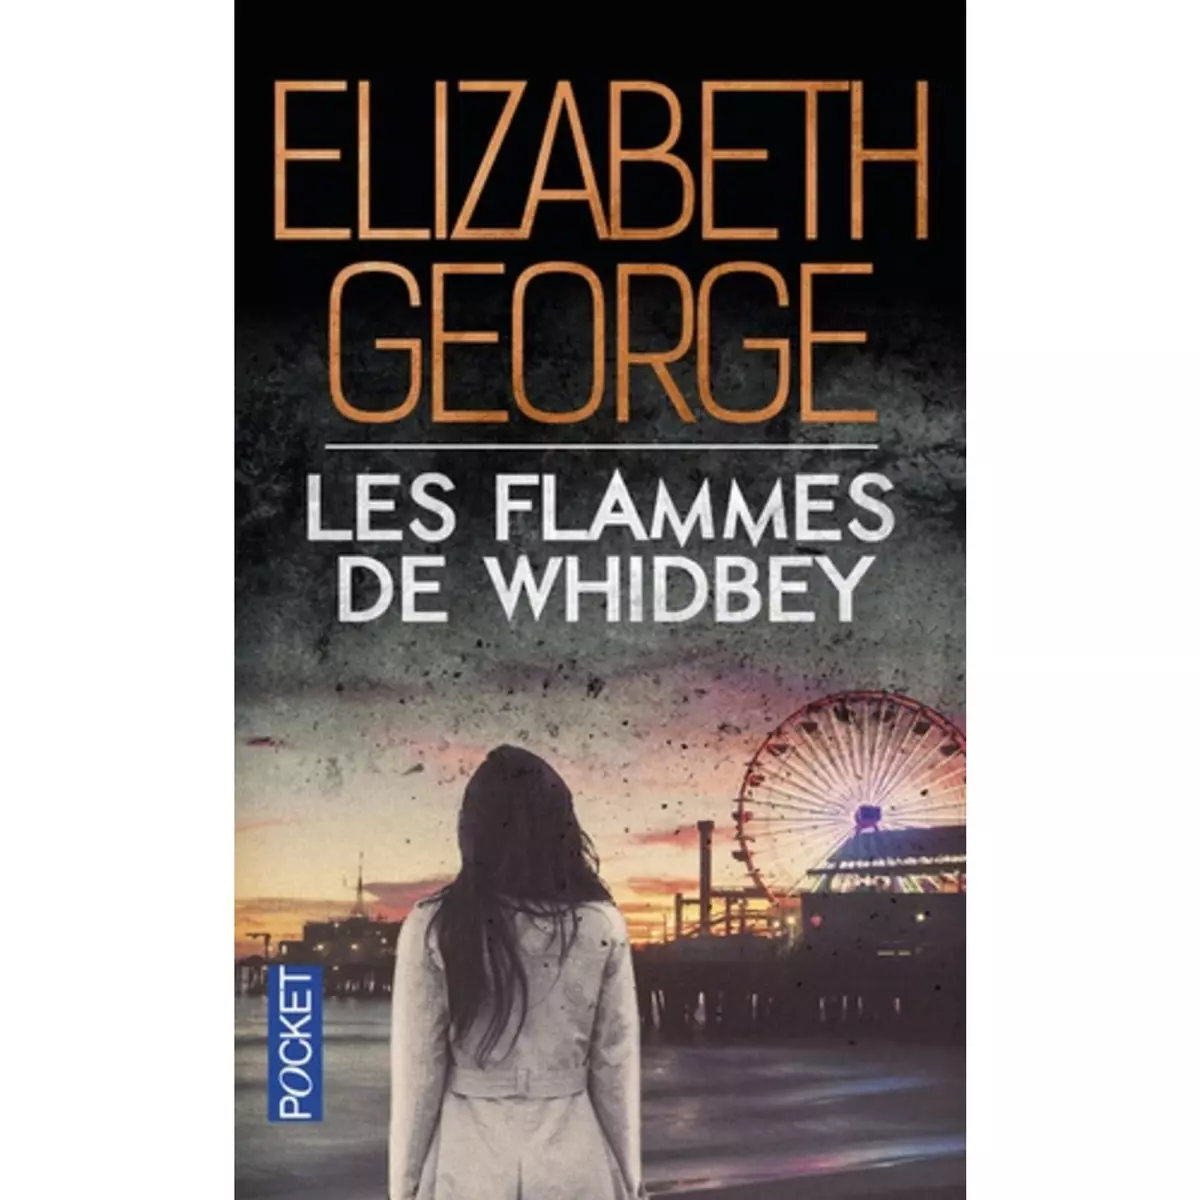  THE EDGE OF NOWHERE TOME 3 : LES FLAMMES DE WHIDBEY, George Elizabeth